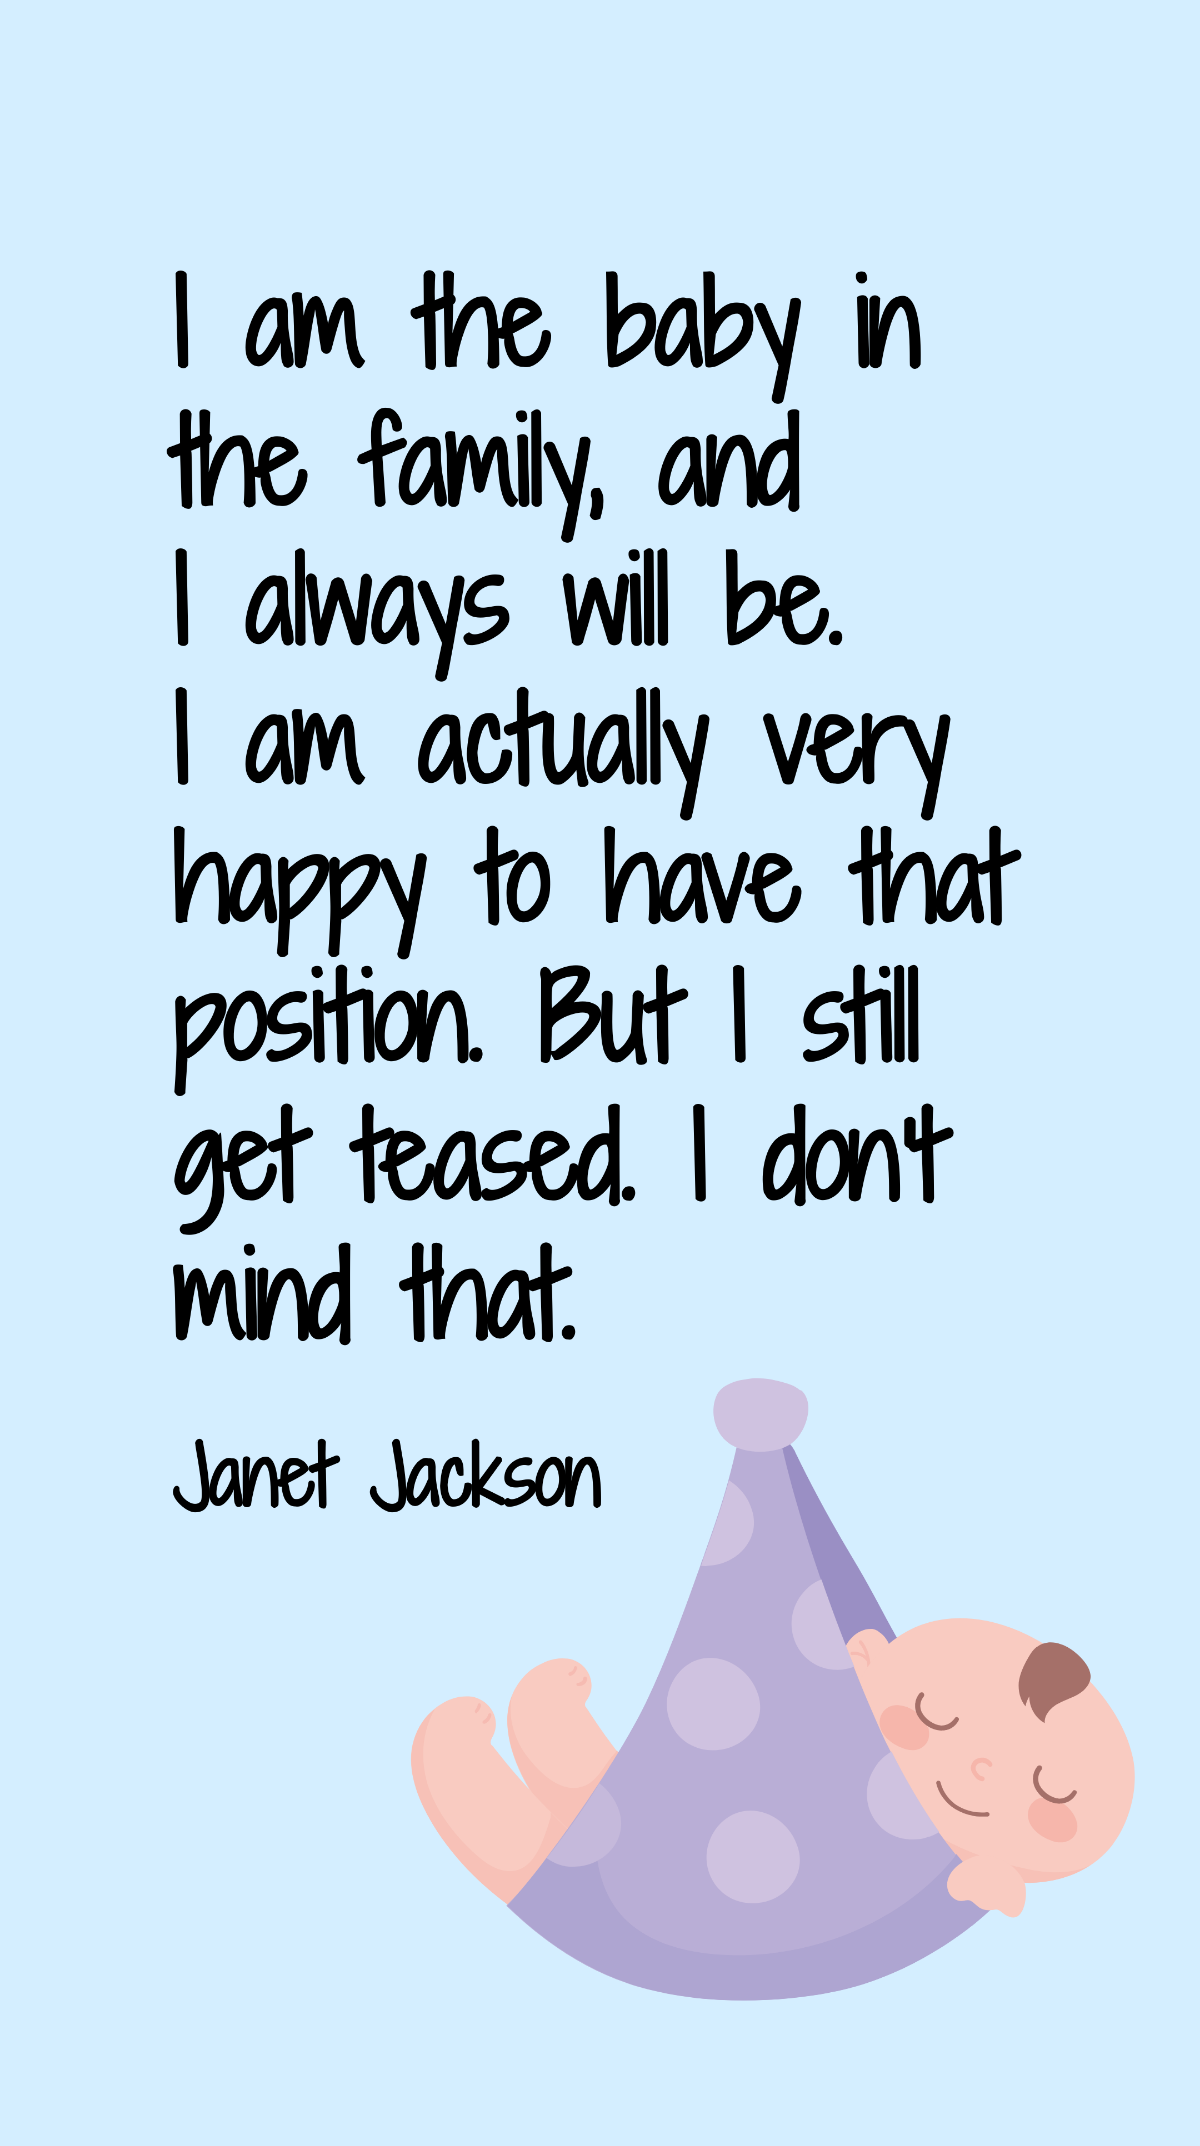 Janet Jackson - I am the baby in the family, and I always will be. I am actually very happy to have that position. But I still get teased. I don't mind that. Template